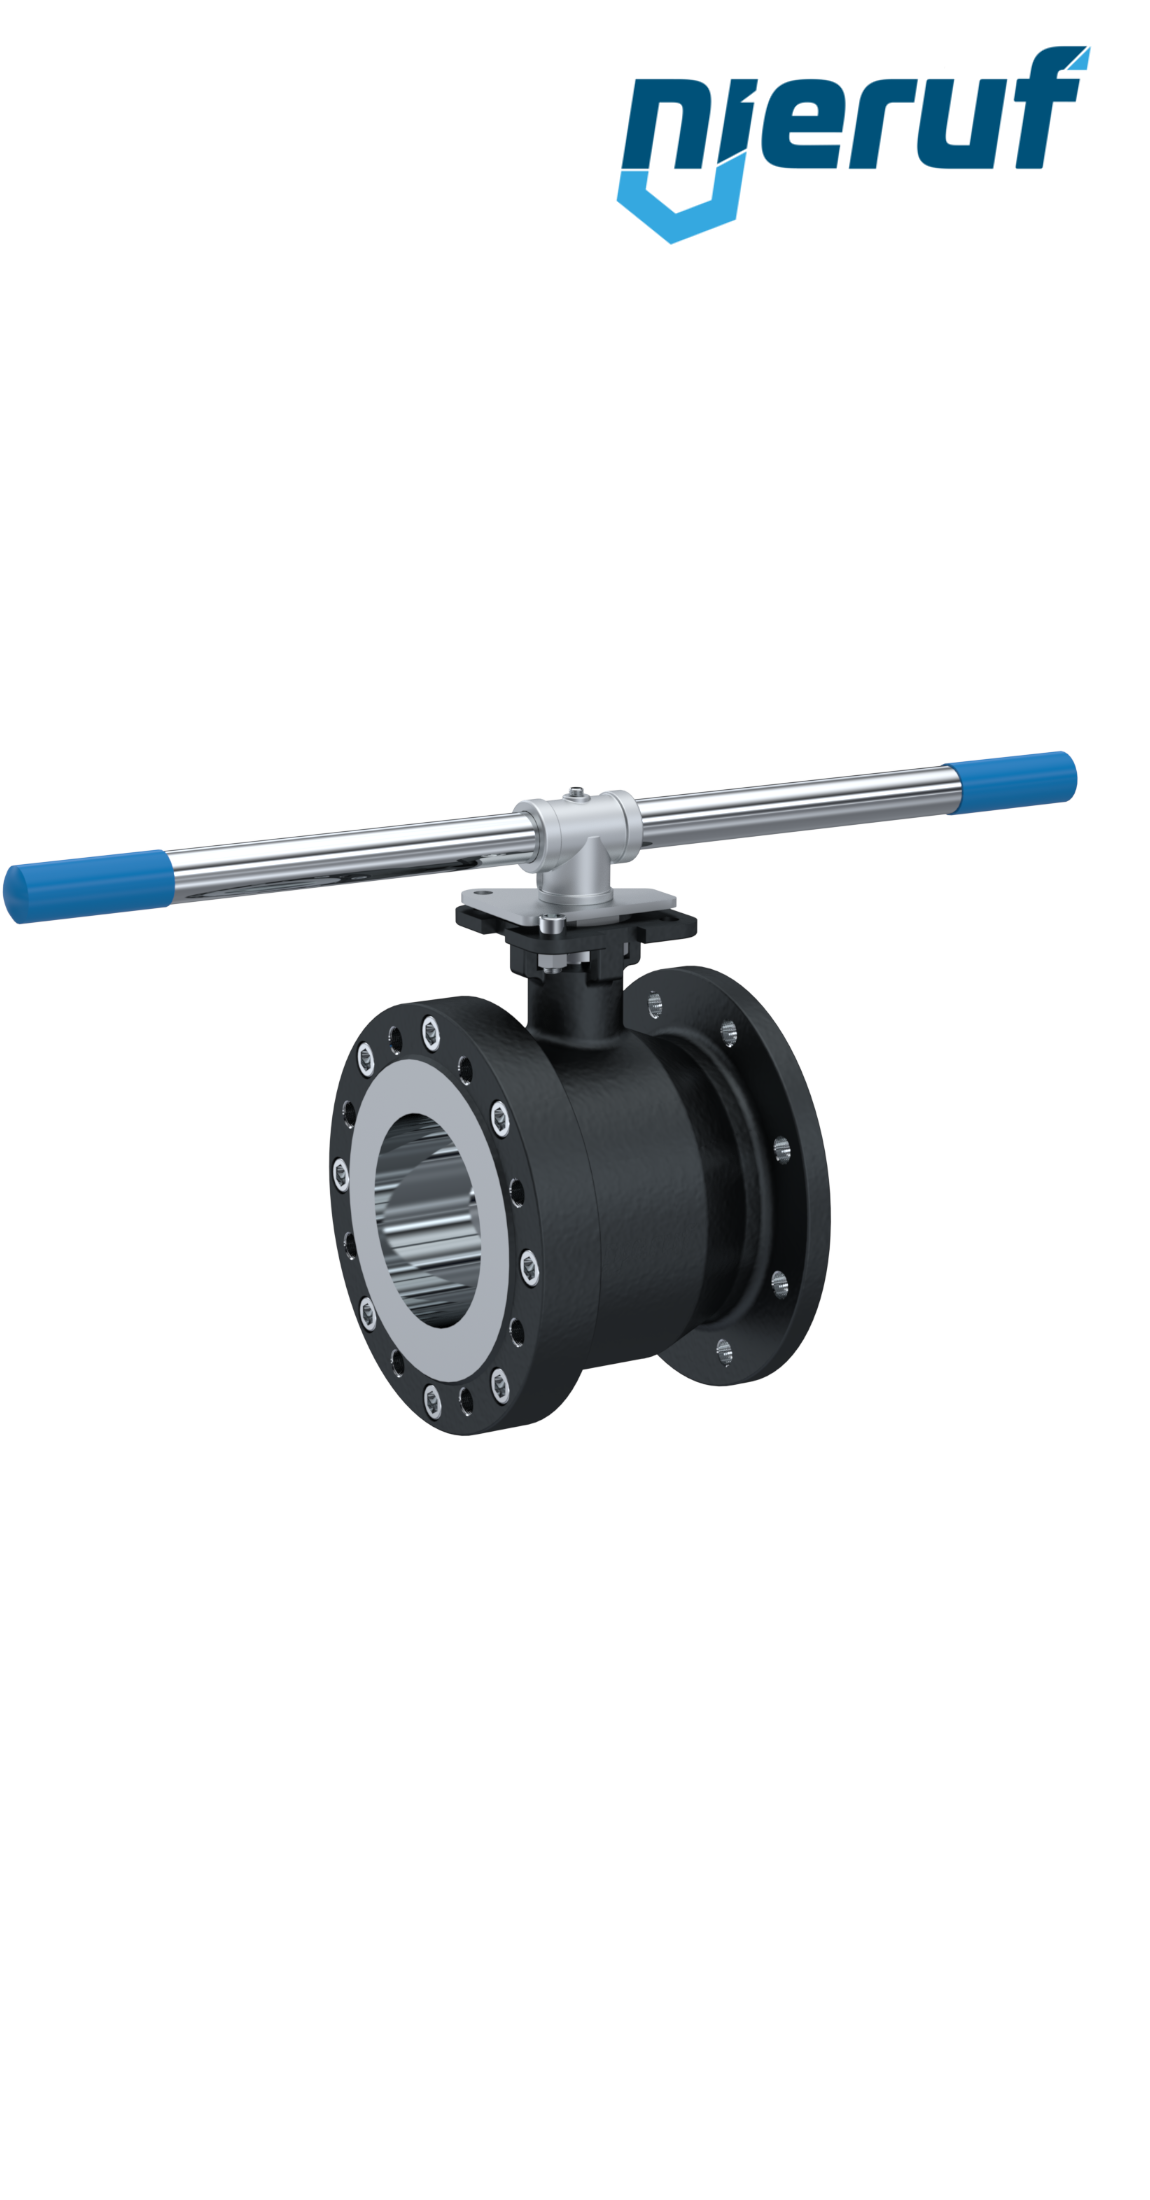 Compact ball valve DN125 PN16 FK03 carbon steel 1.0619 ball stainless steel 1.4408